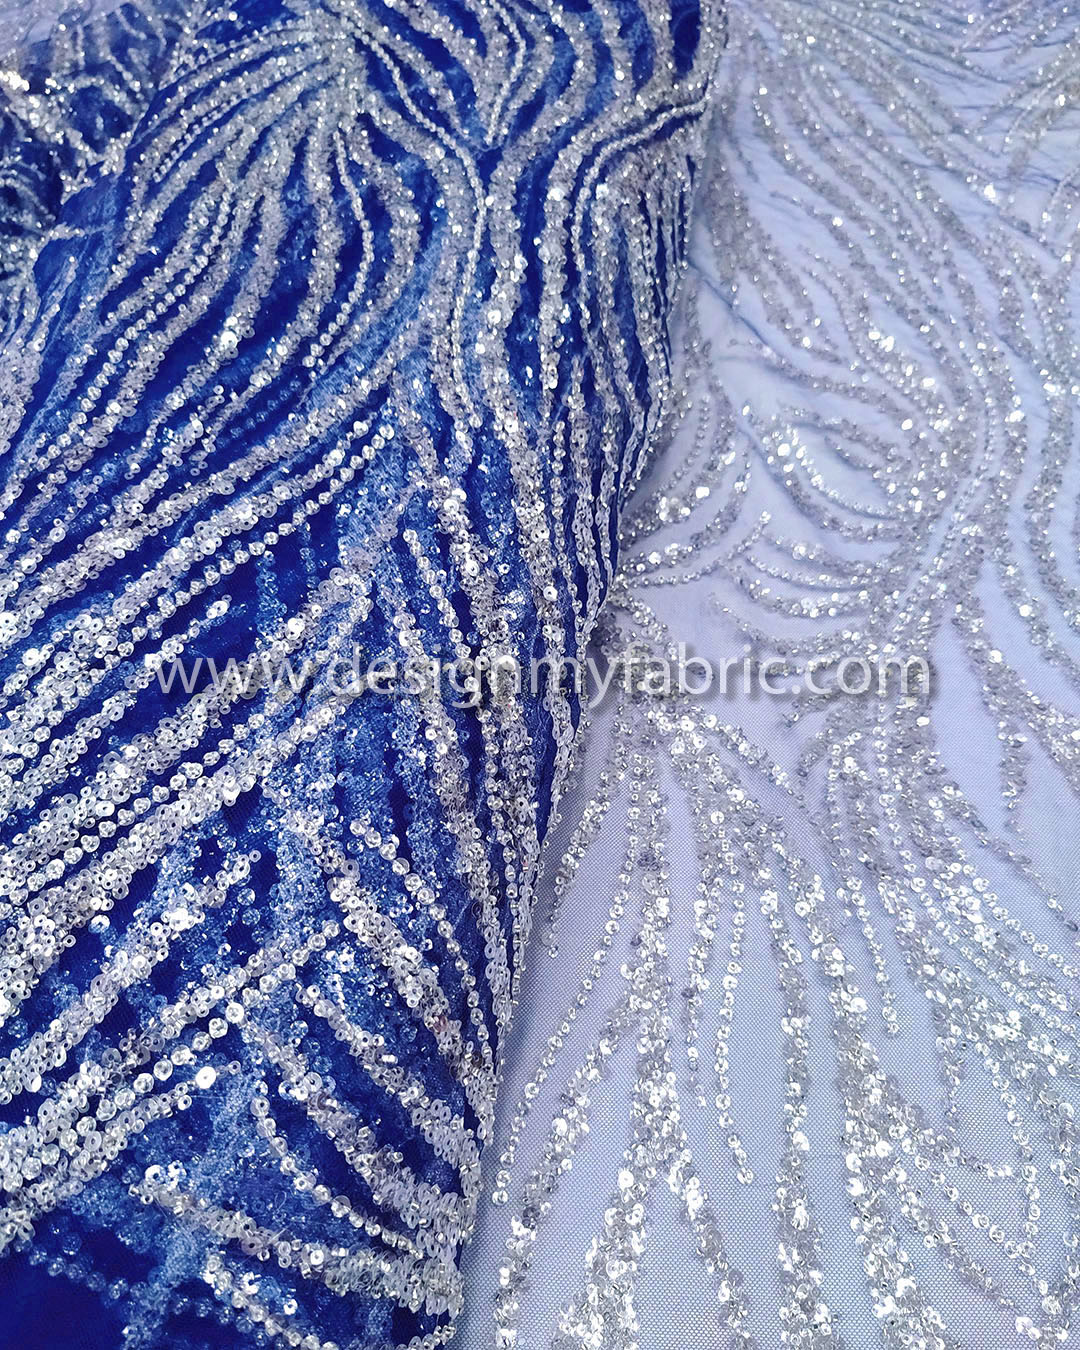 Sparkling Blue Sequin Textile Background Fabric Sequins On Fabric Fabric  Embroidered Sequins Stock Photo - Download Image Now - iStock